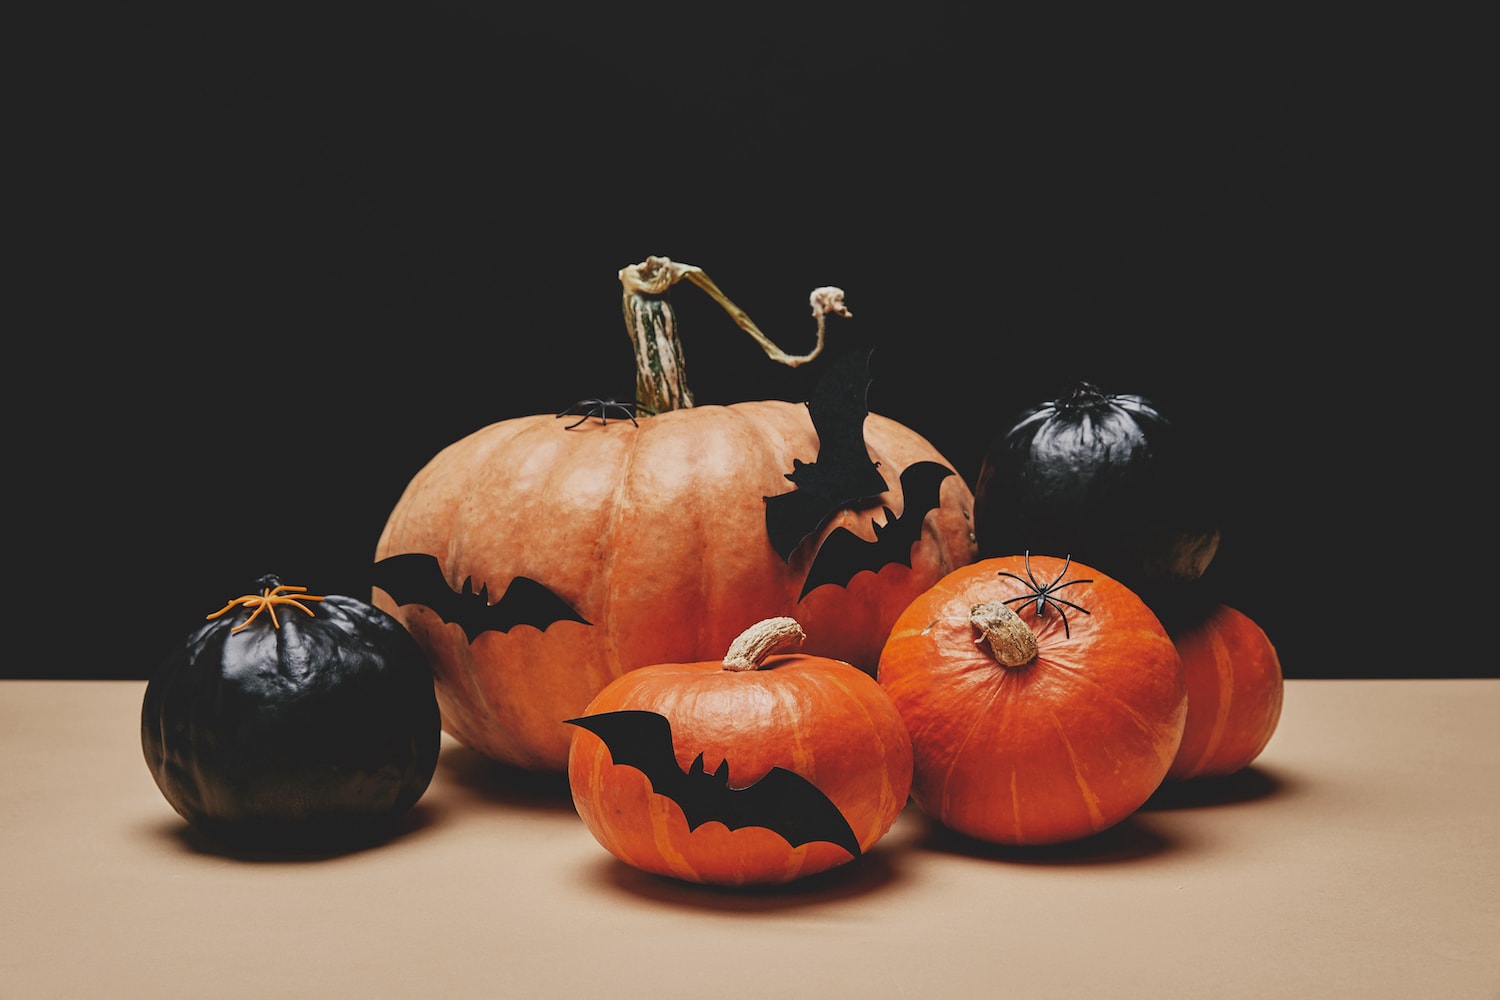 Halloween scene with black and orange punpkins decorated with paper bats.